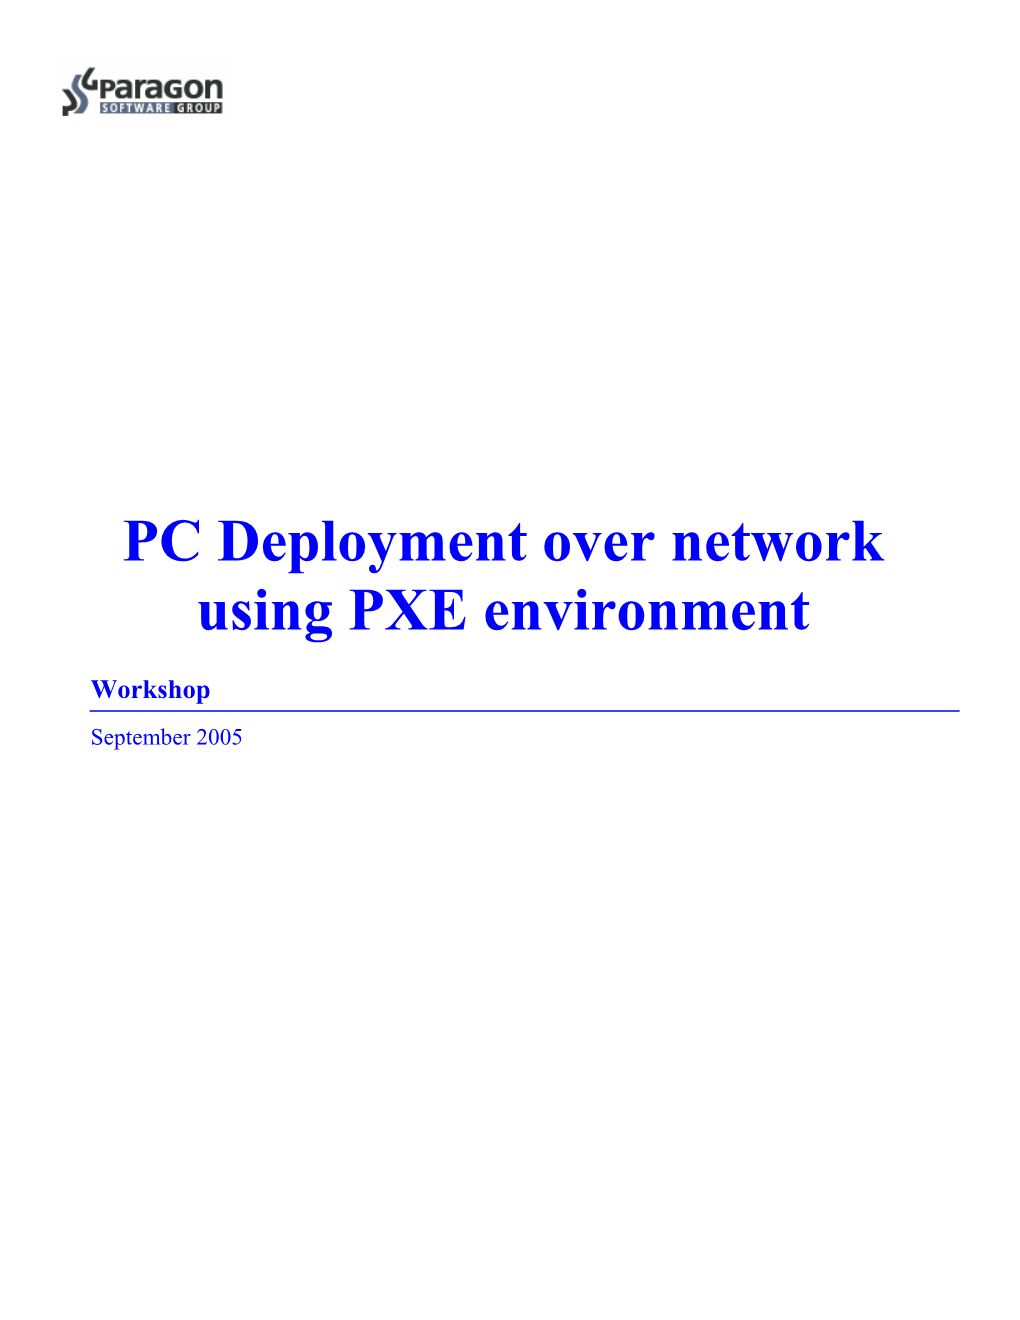 PC Deployment Over Network Using PXE Environment